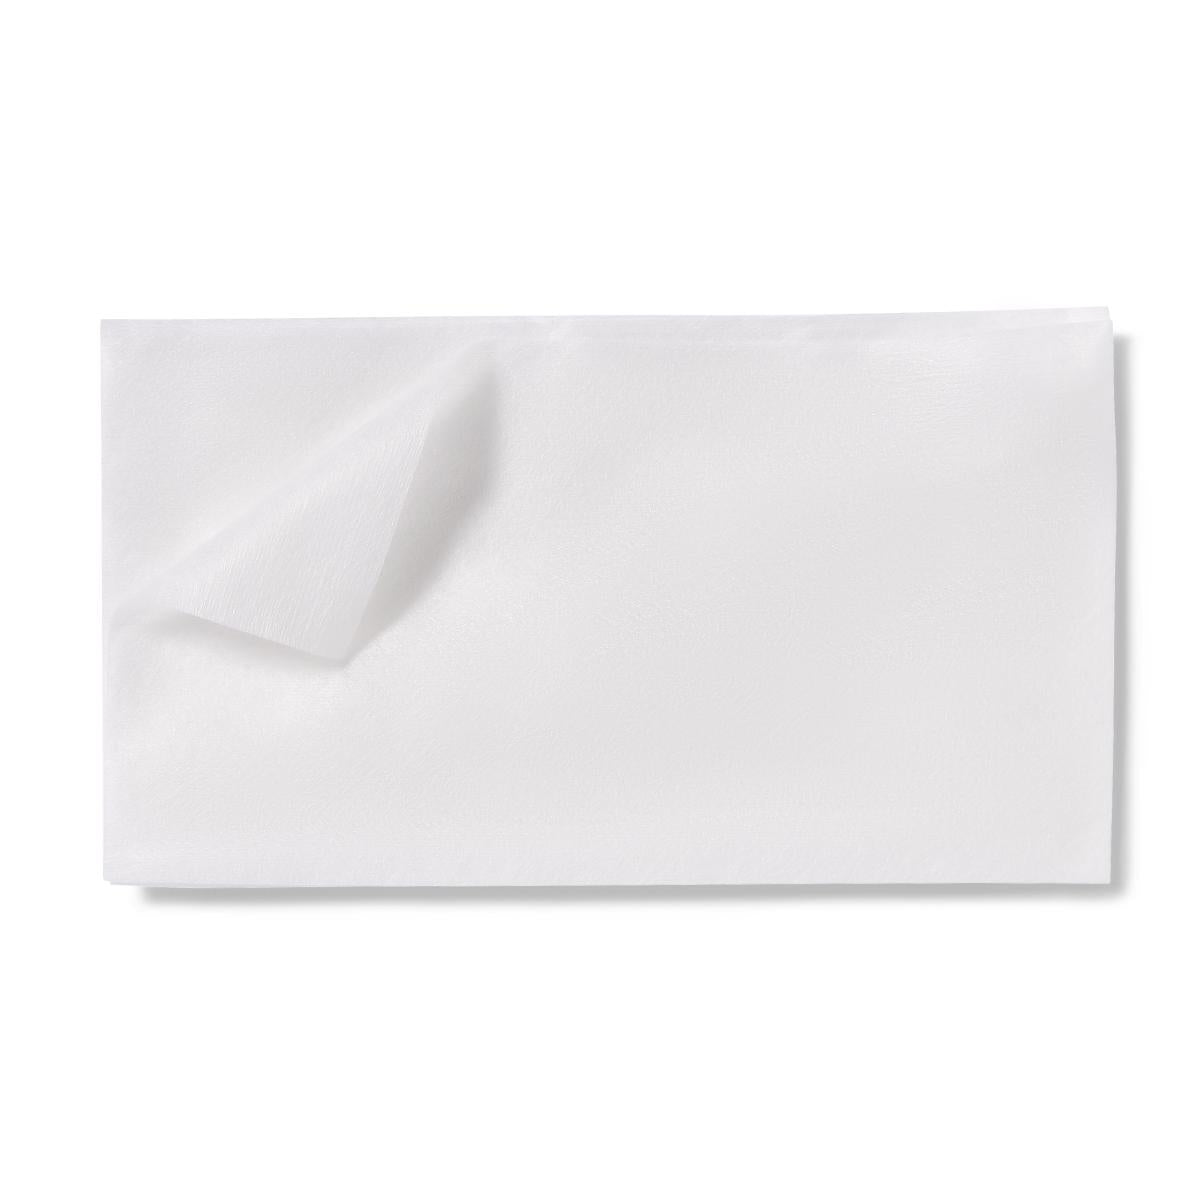 1200 Each-Case / White / 7" X 13" Incontinence - MEDLINE - Wasatch Medical Supply